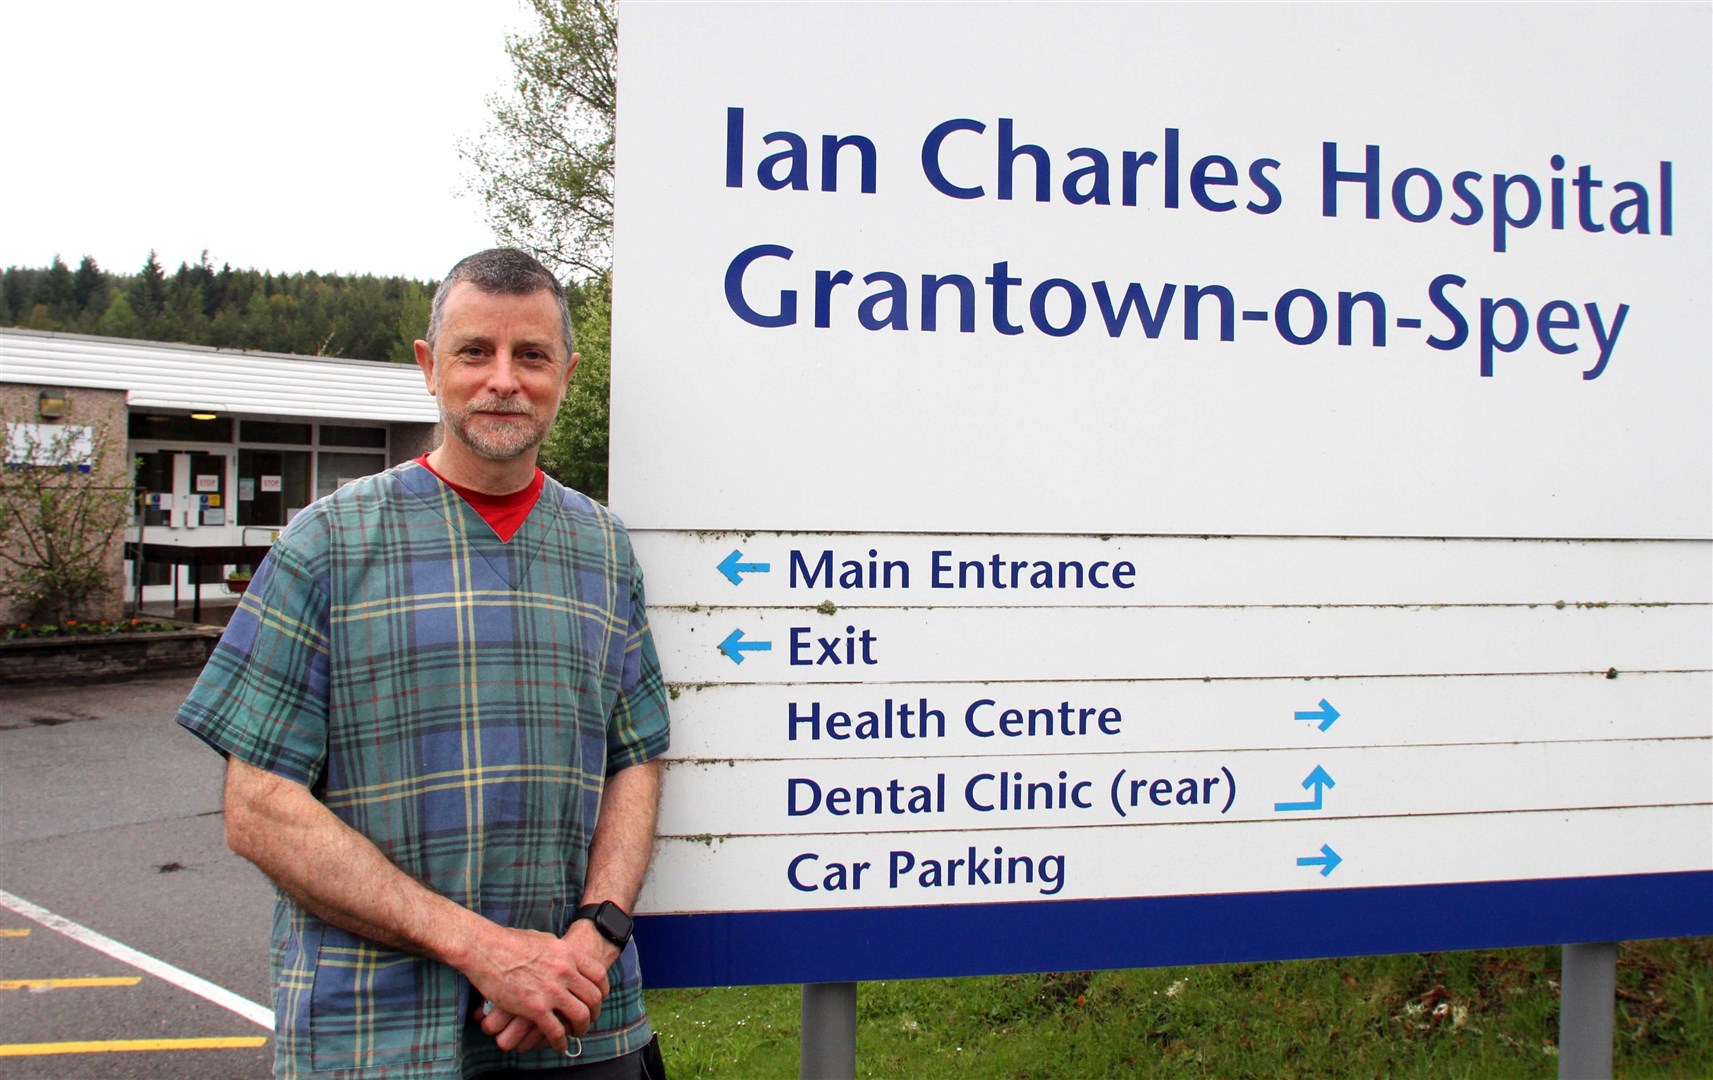 Dr Andrew Melton outside the entrance to the health centre and Ian Charles Hospital.